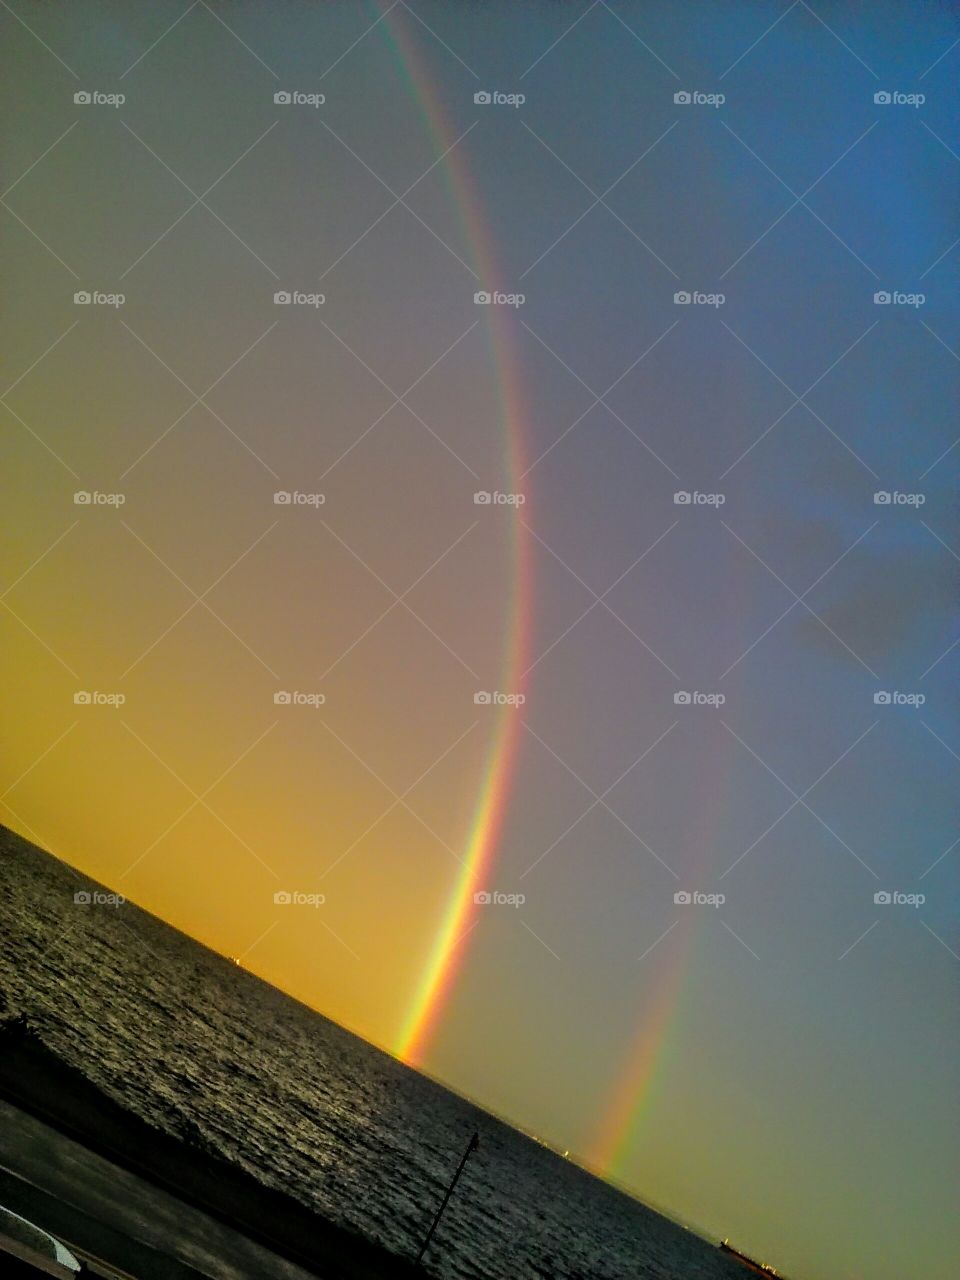 mystical rainbow and the nautical scean is breath taking never seen a dbl rainbow like this